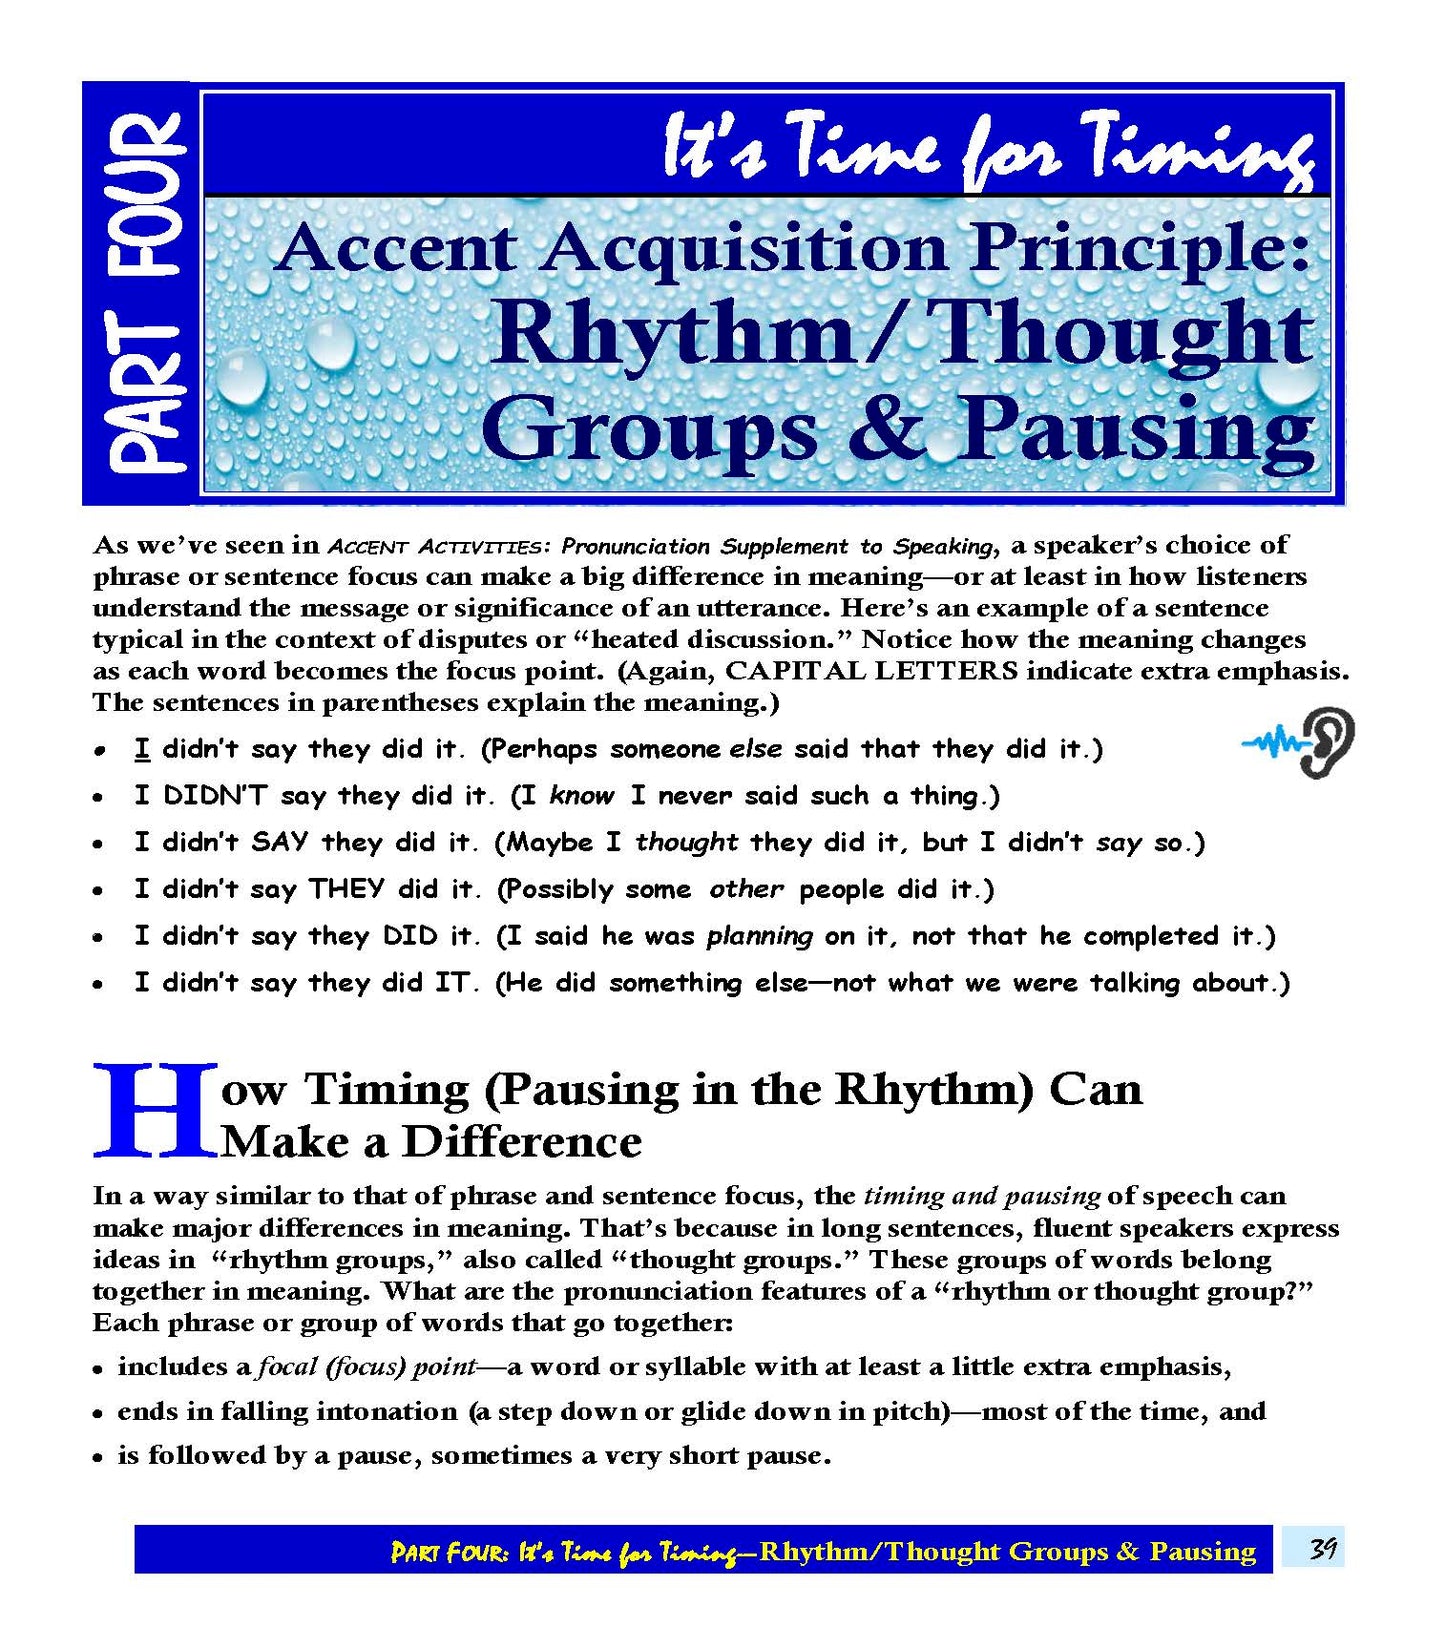 E-03.11 Sum Up the Accent Acquisition Principle of Rhythm with Thought Groups & Pausing